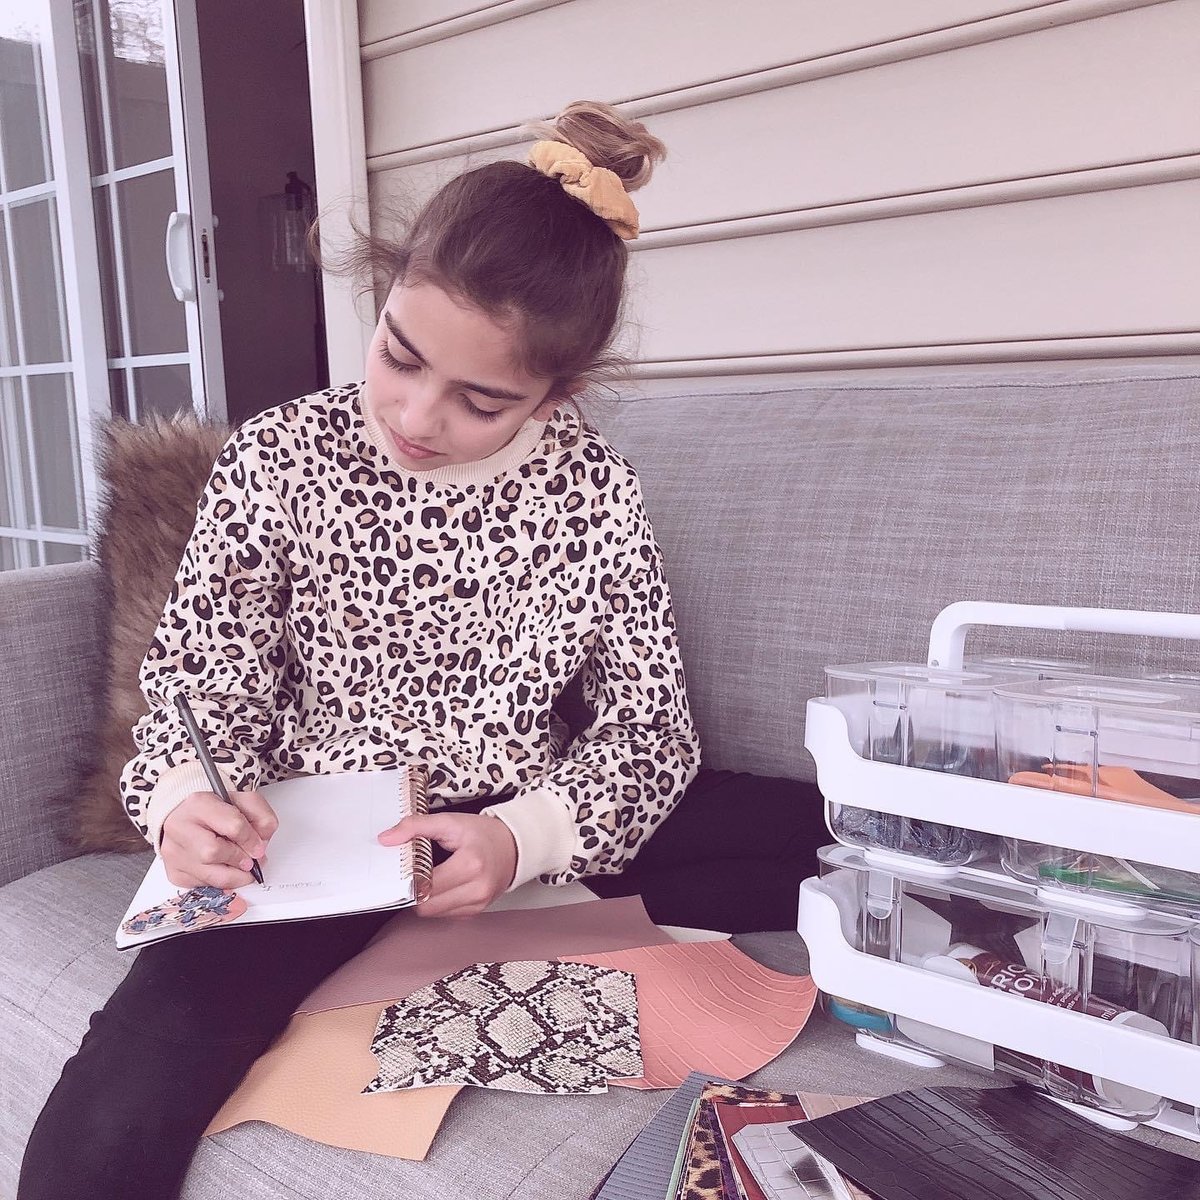 MakersValley | This Middle Schooler is Redefining Modern Fashion One Design at a Time